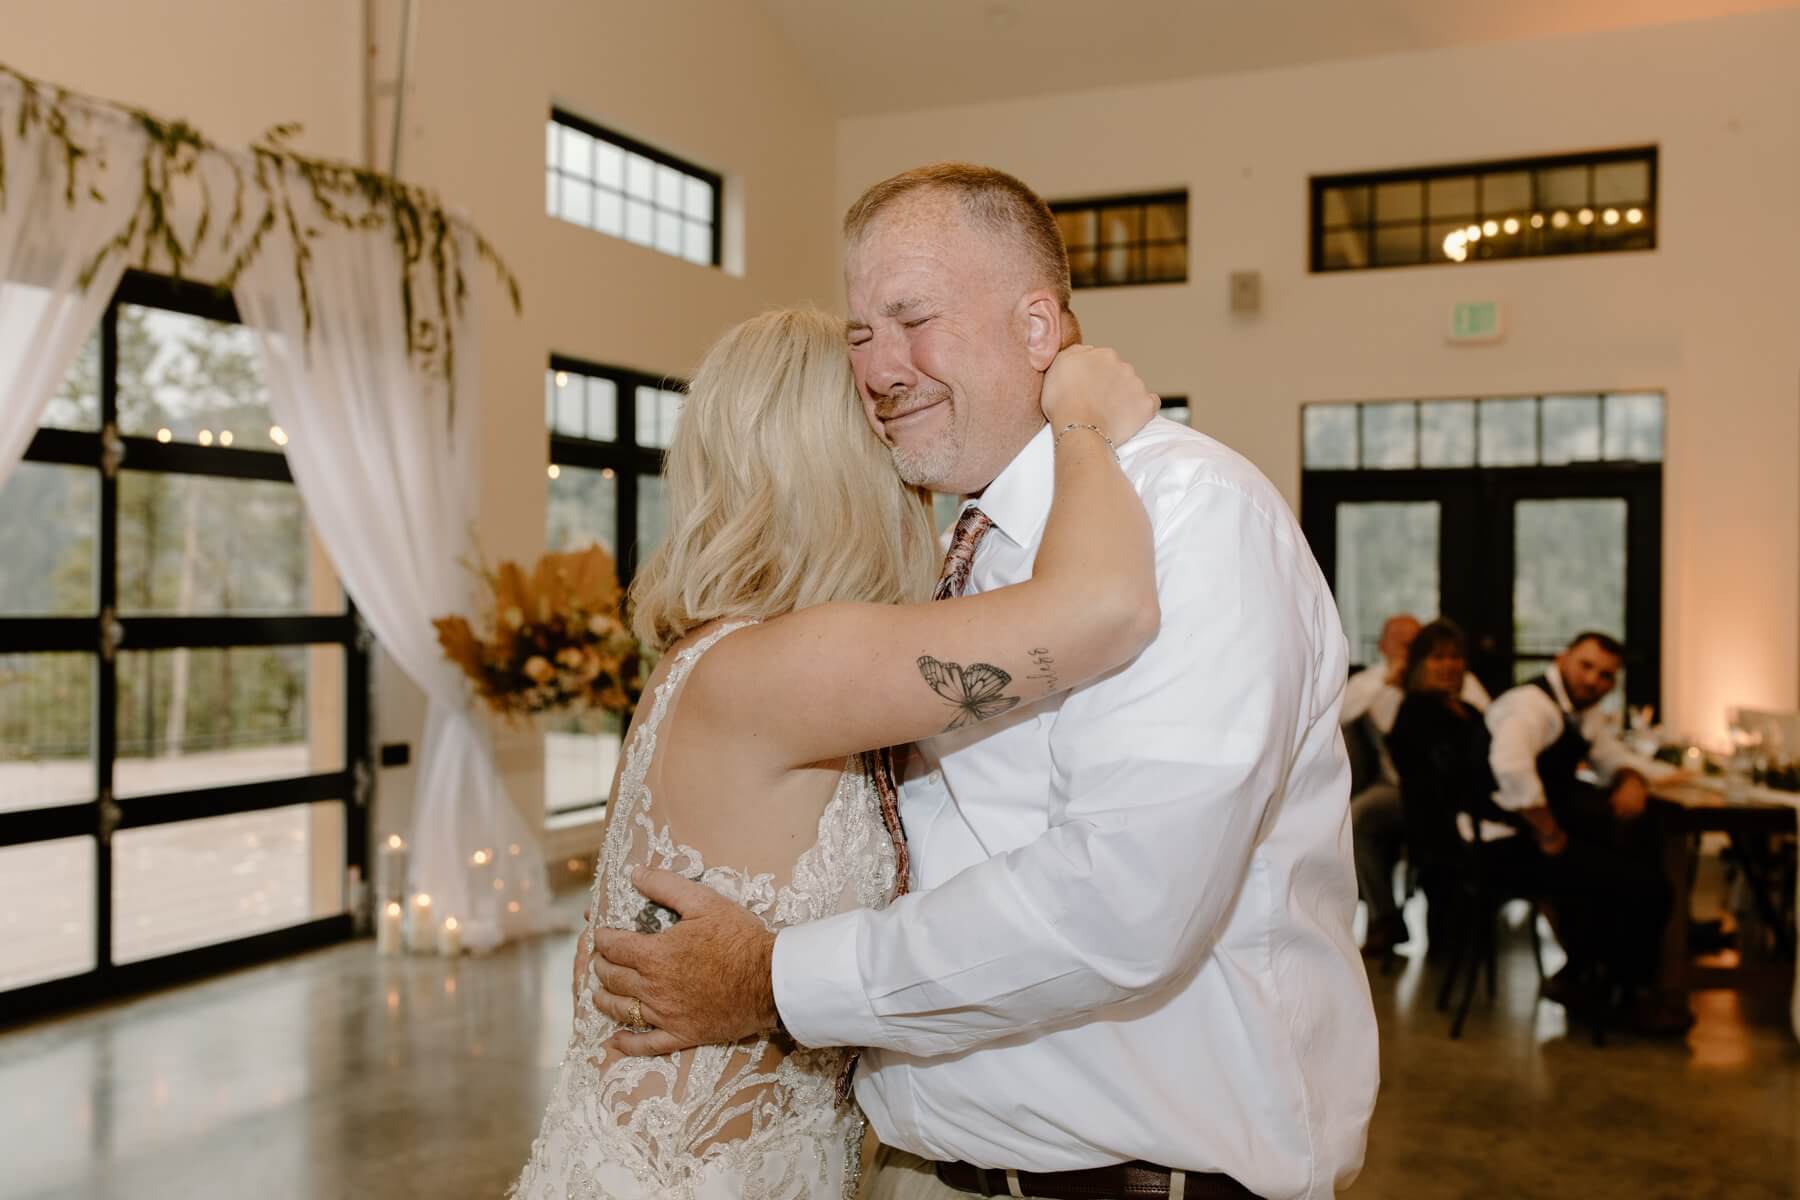 Bride dancing with father during reception at idaho springs wedding venue | McArthur Weddings and Events